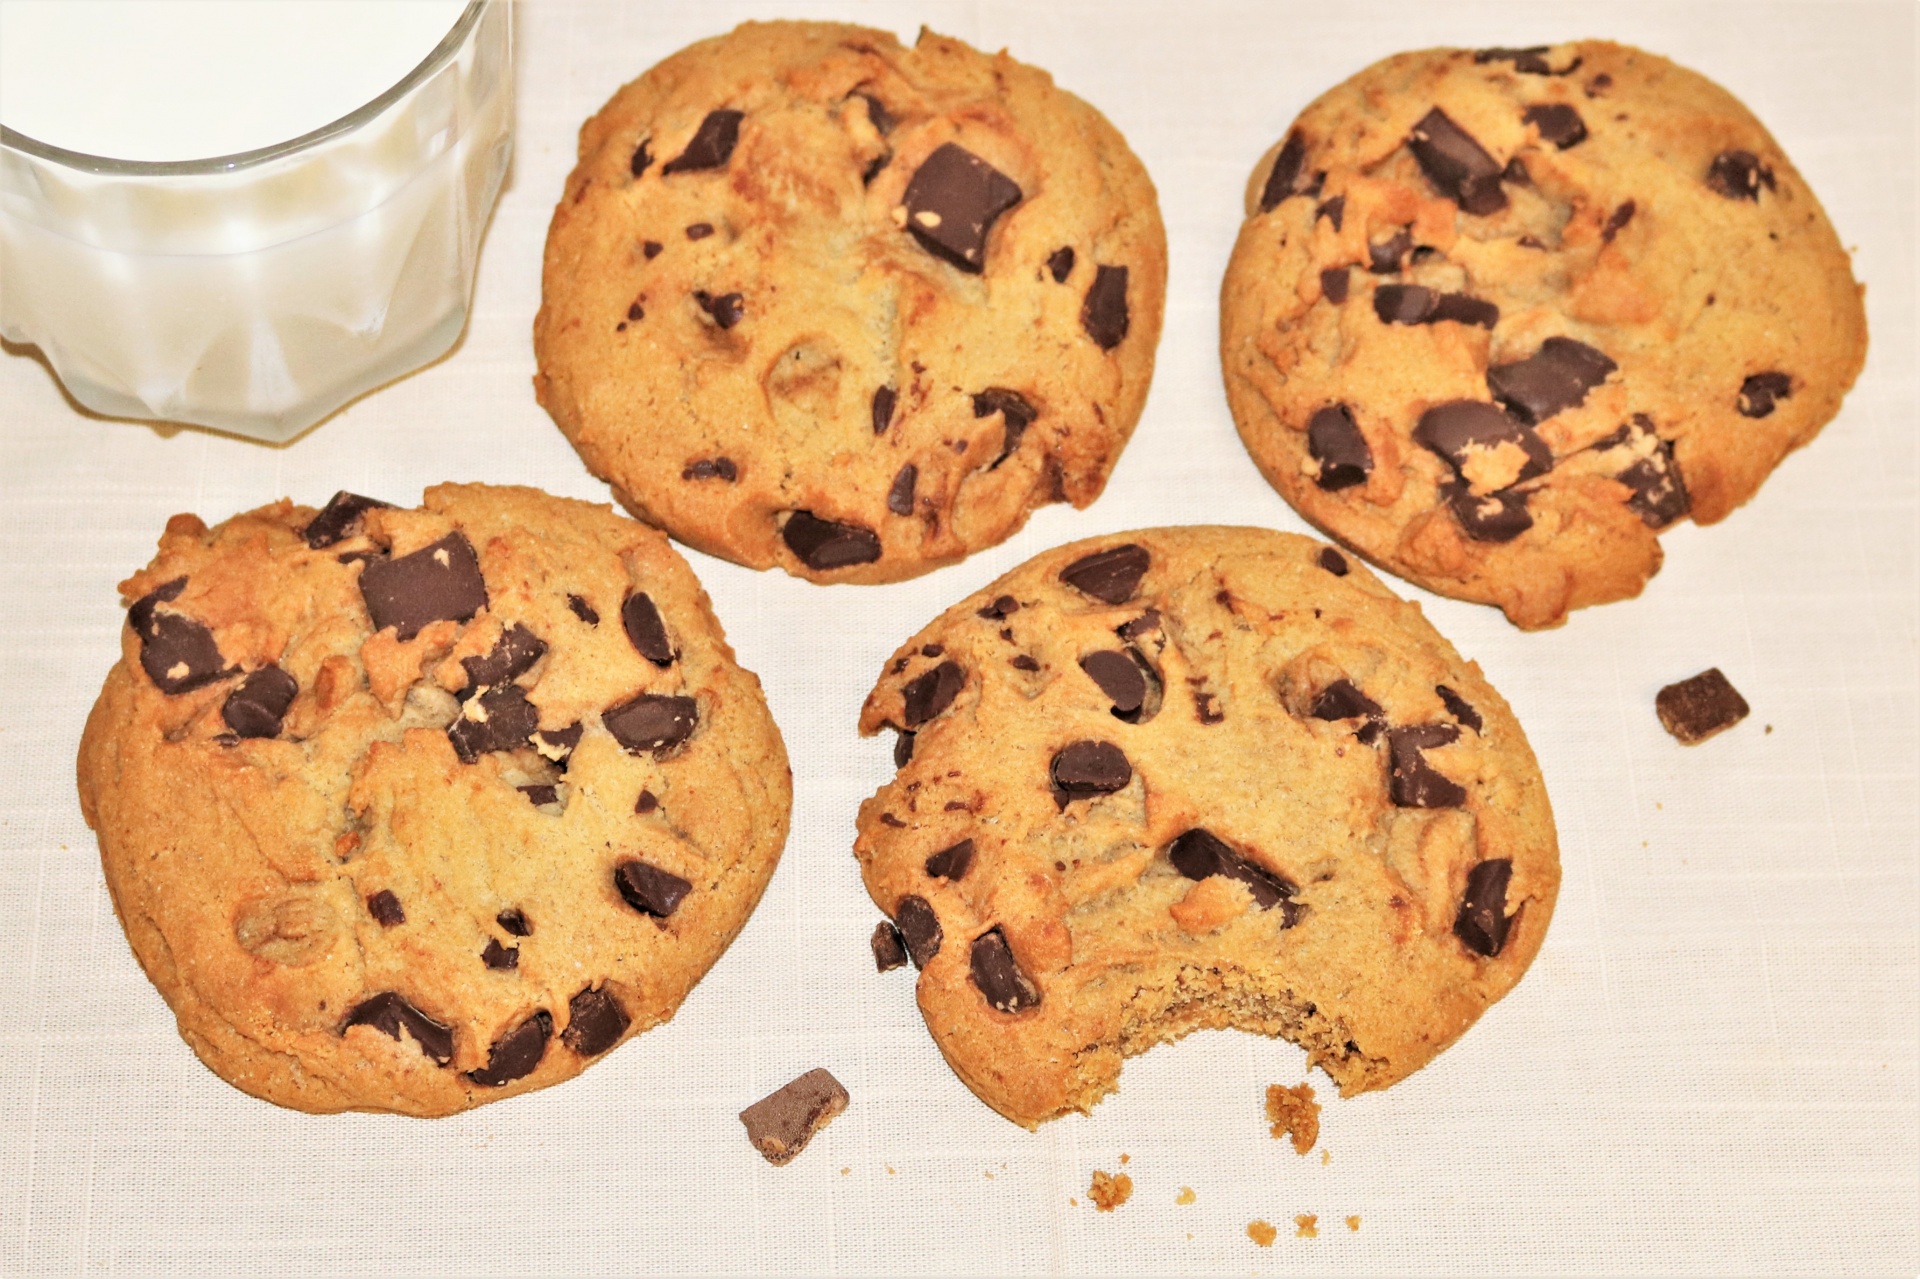 Chocolate Chip Cookies And Milk 2 Free Stock Photo - Public Domain Pictures